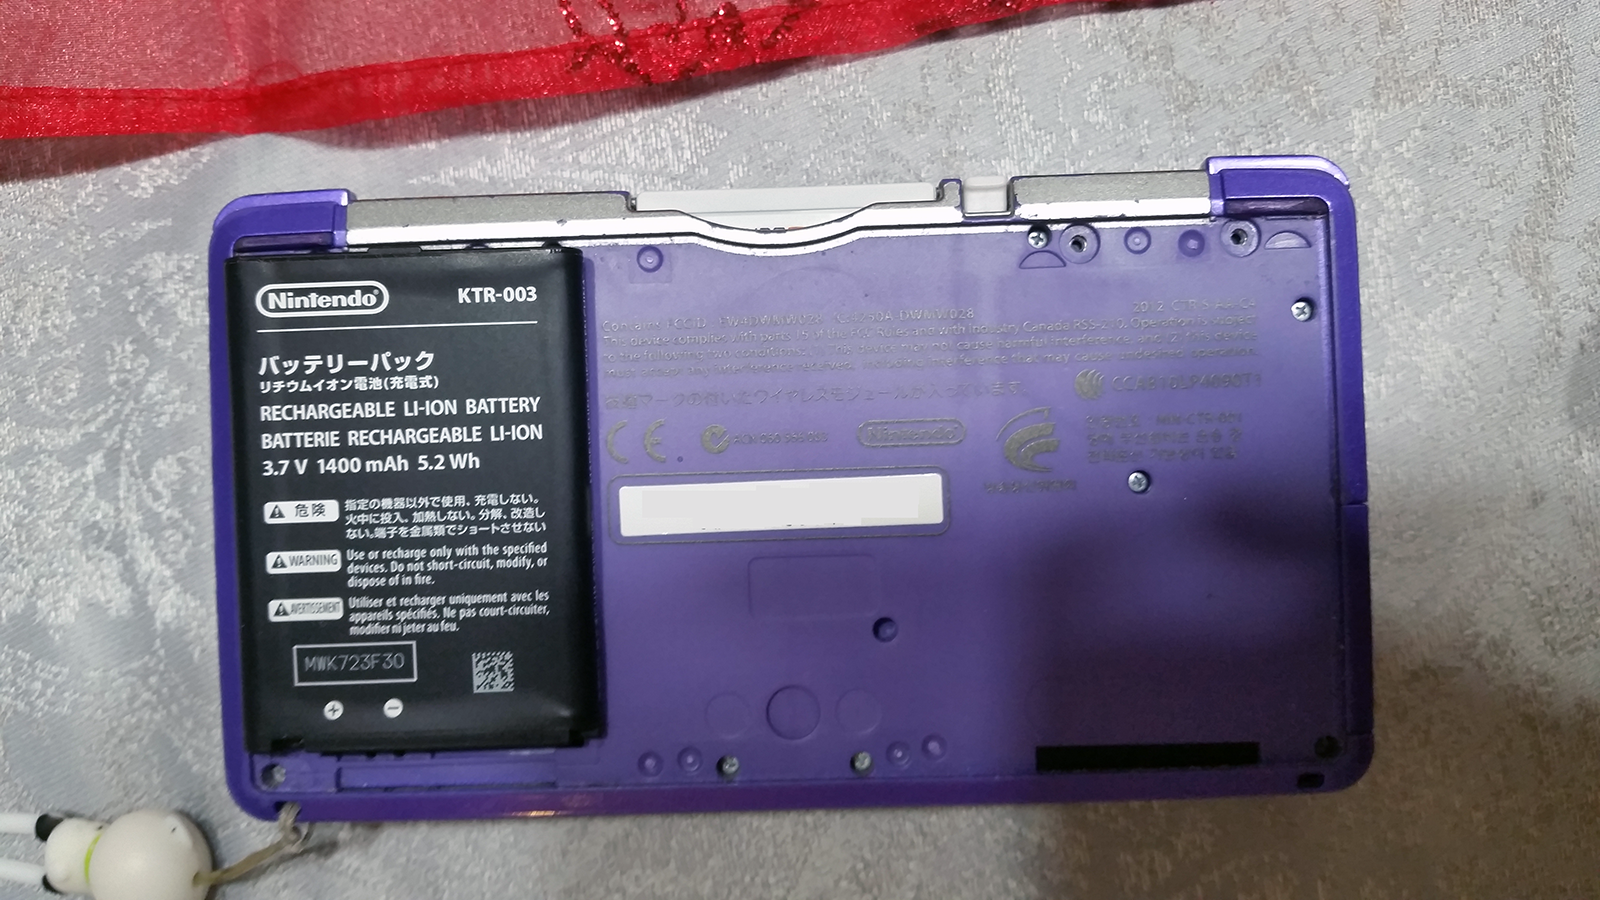 o3DS KTR-003 battery.png